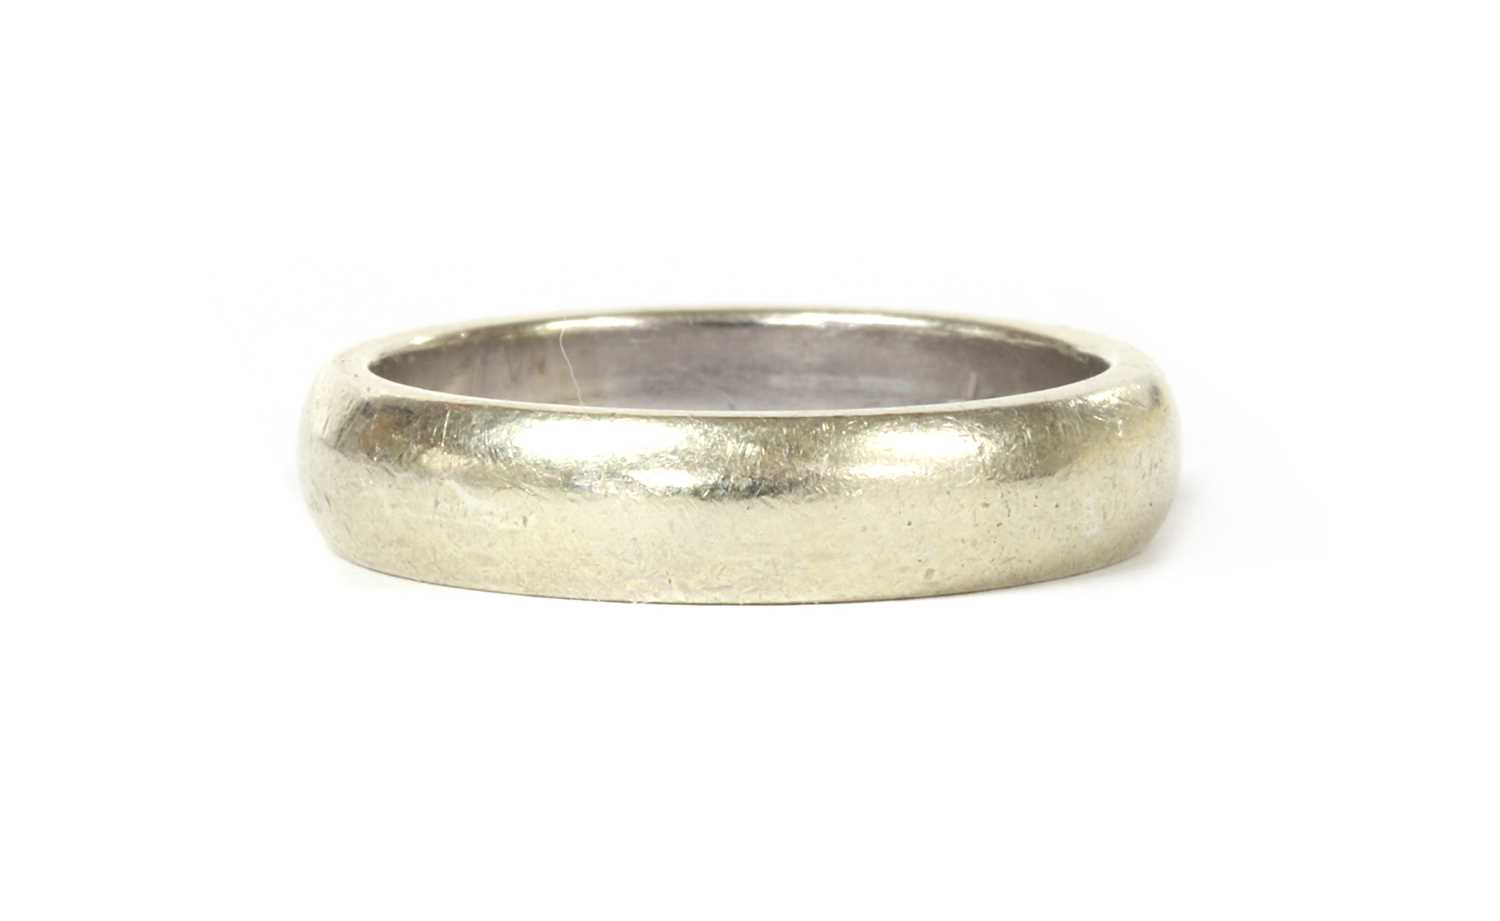 Lot 1076 - A 9ct white gold 'D' section wedding ring